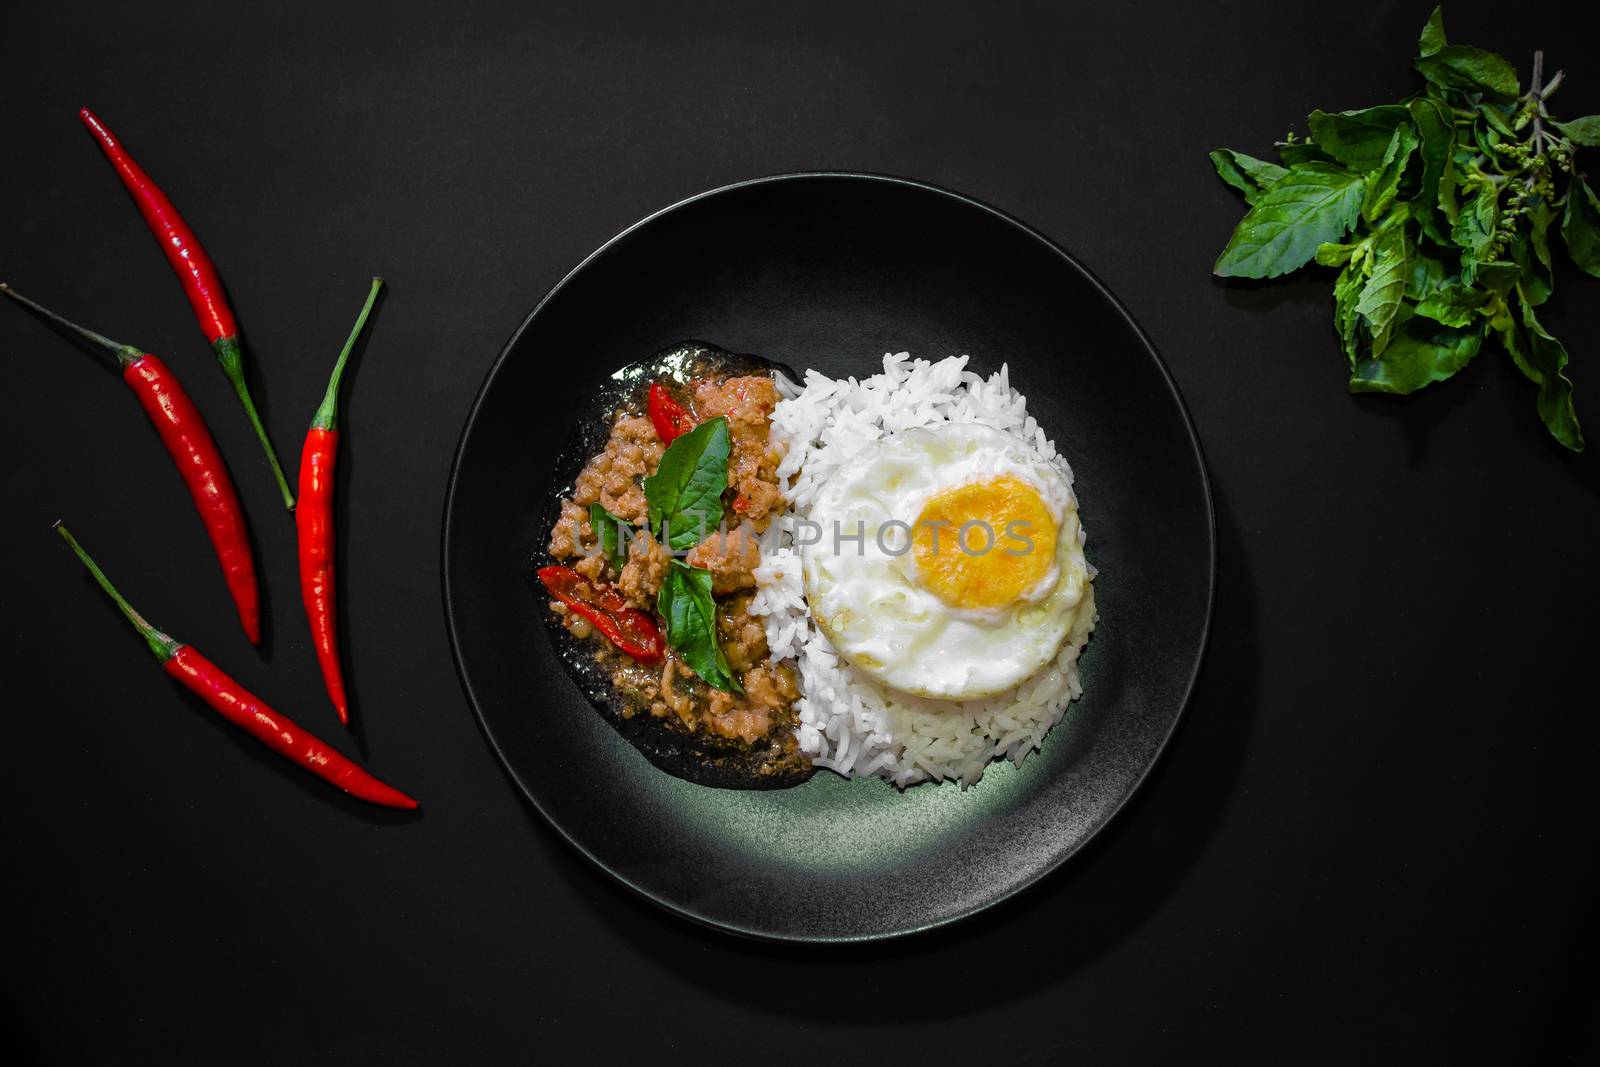 Rice with pork stir fried with basil and fried egg on black background, Thai food, Street food, Image from the top view